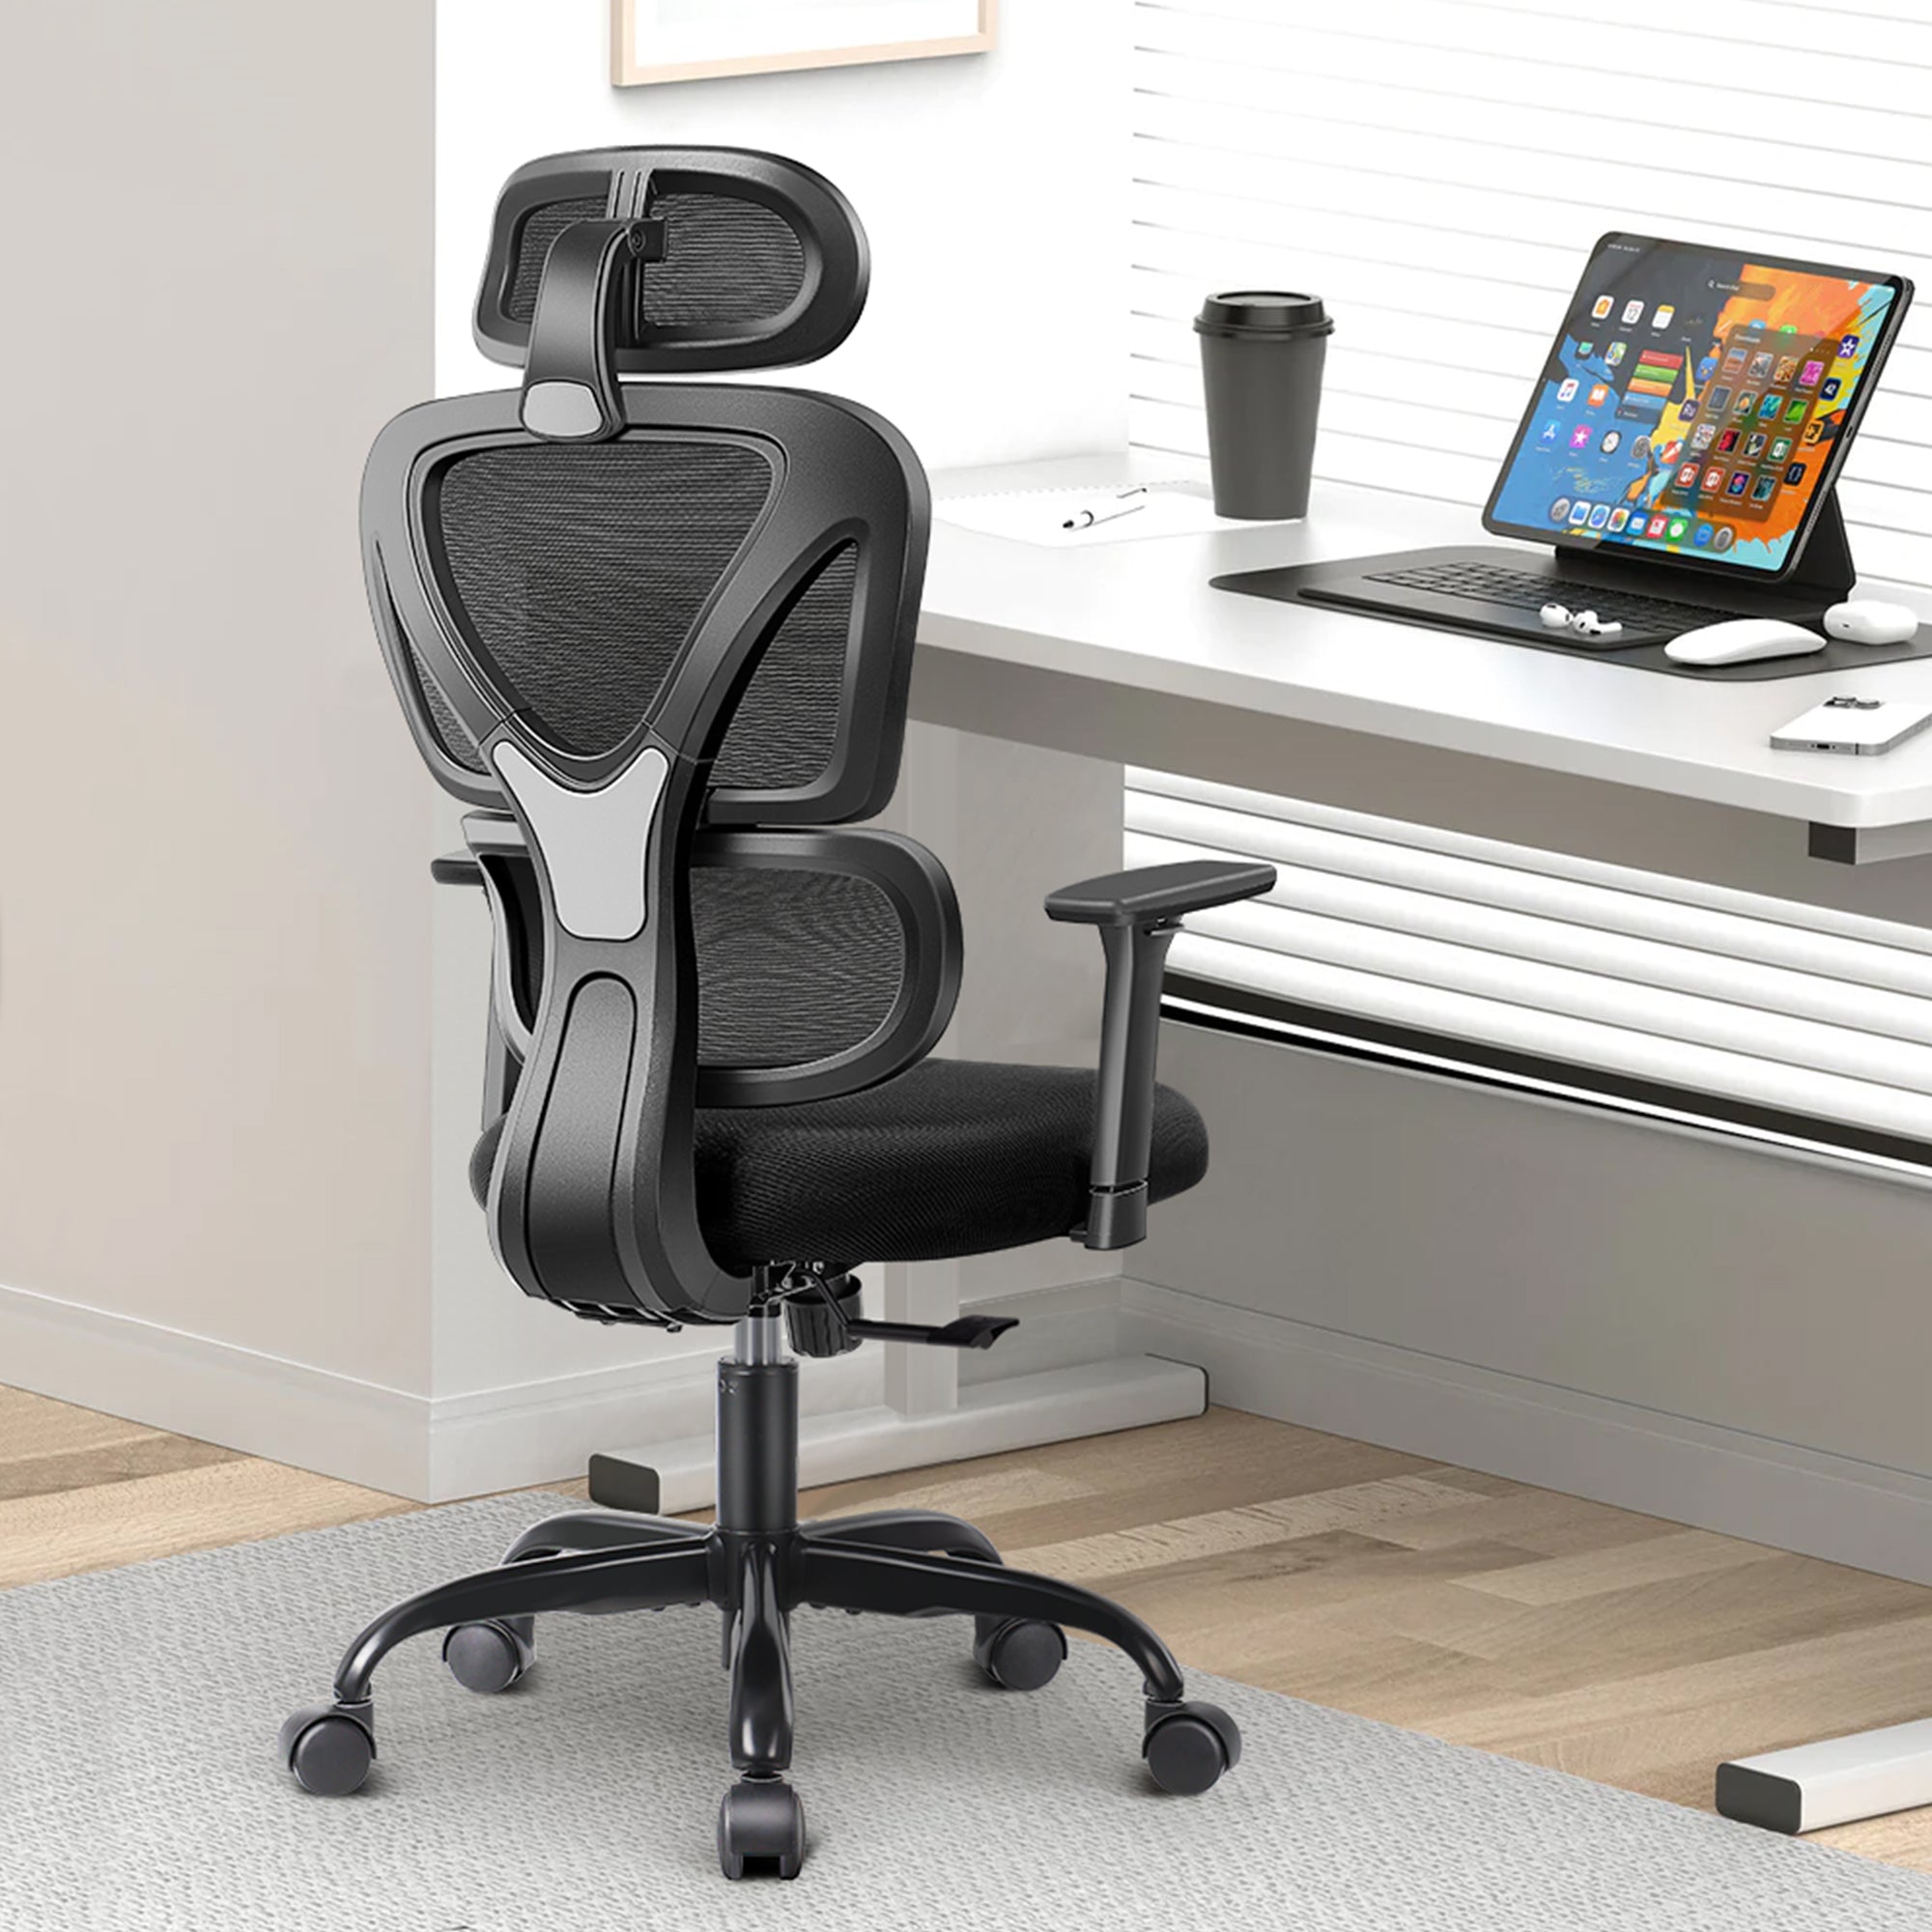 KERDOM High Back Ergonomic Office Chair with Lumbar Support